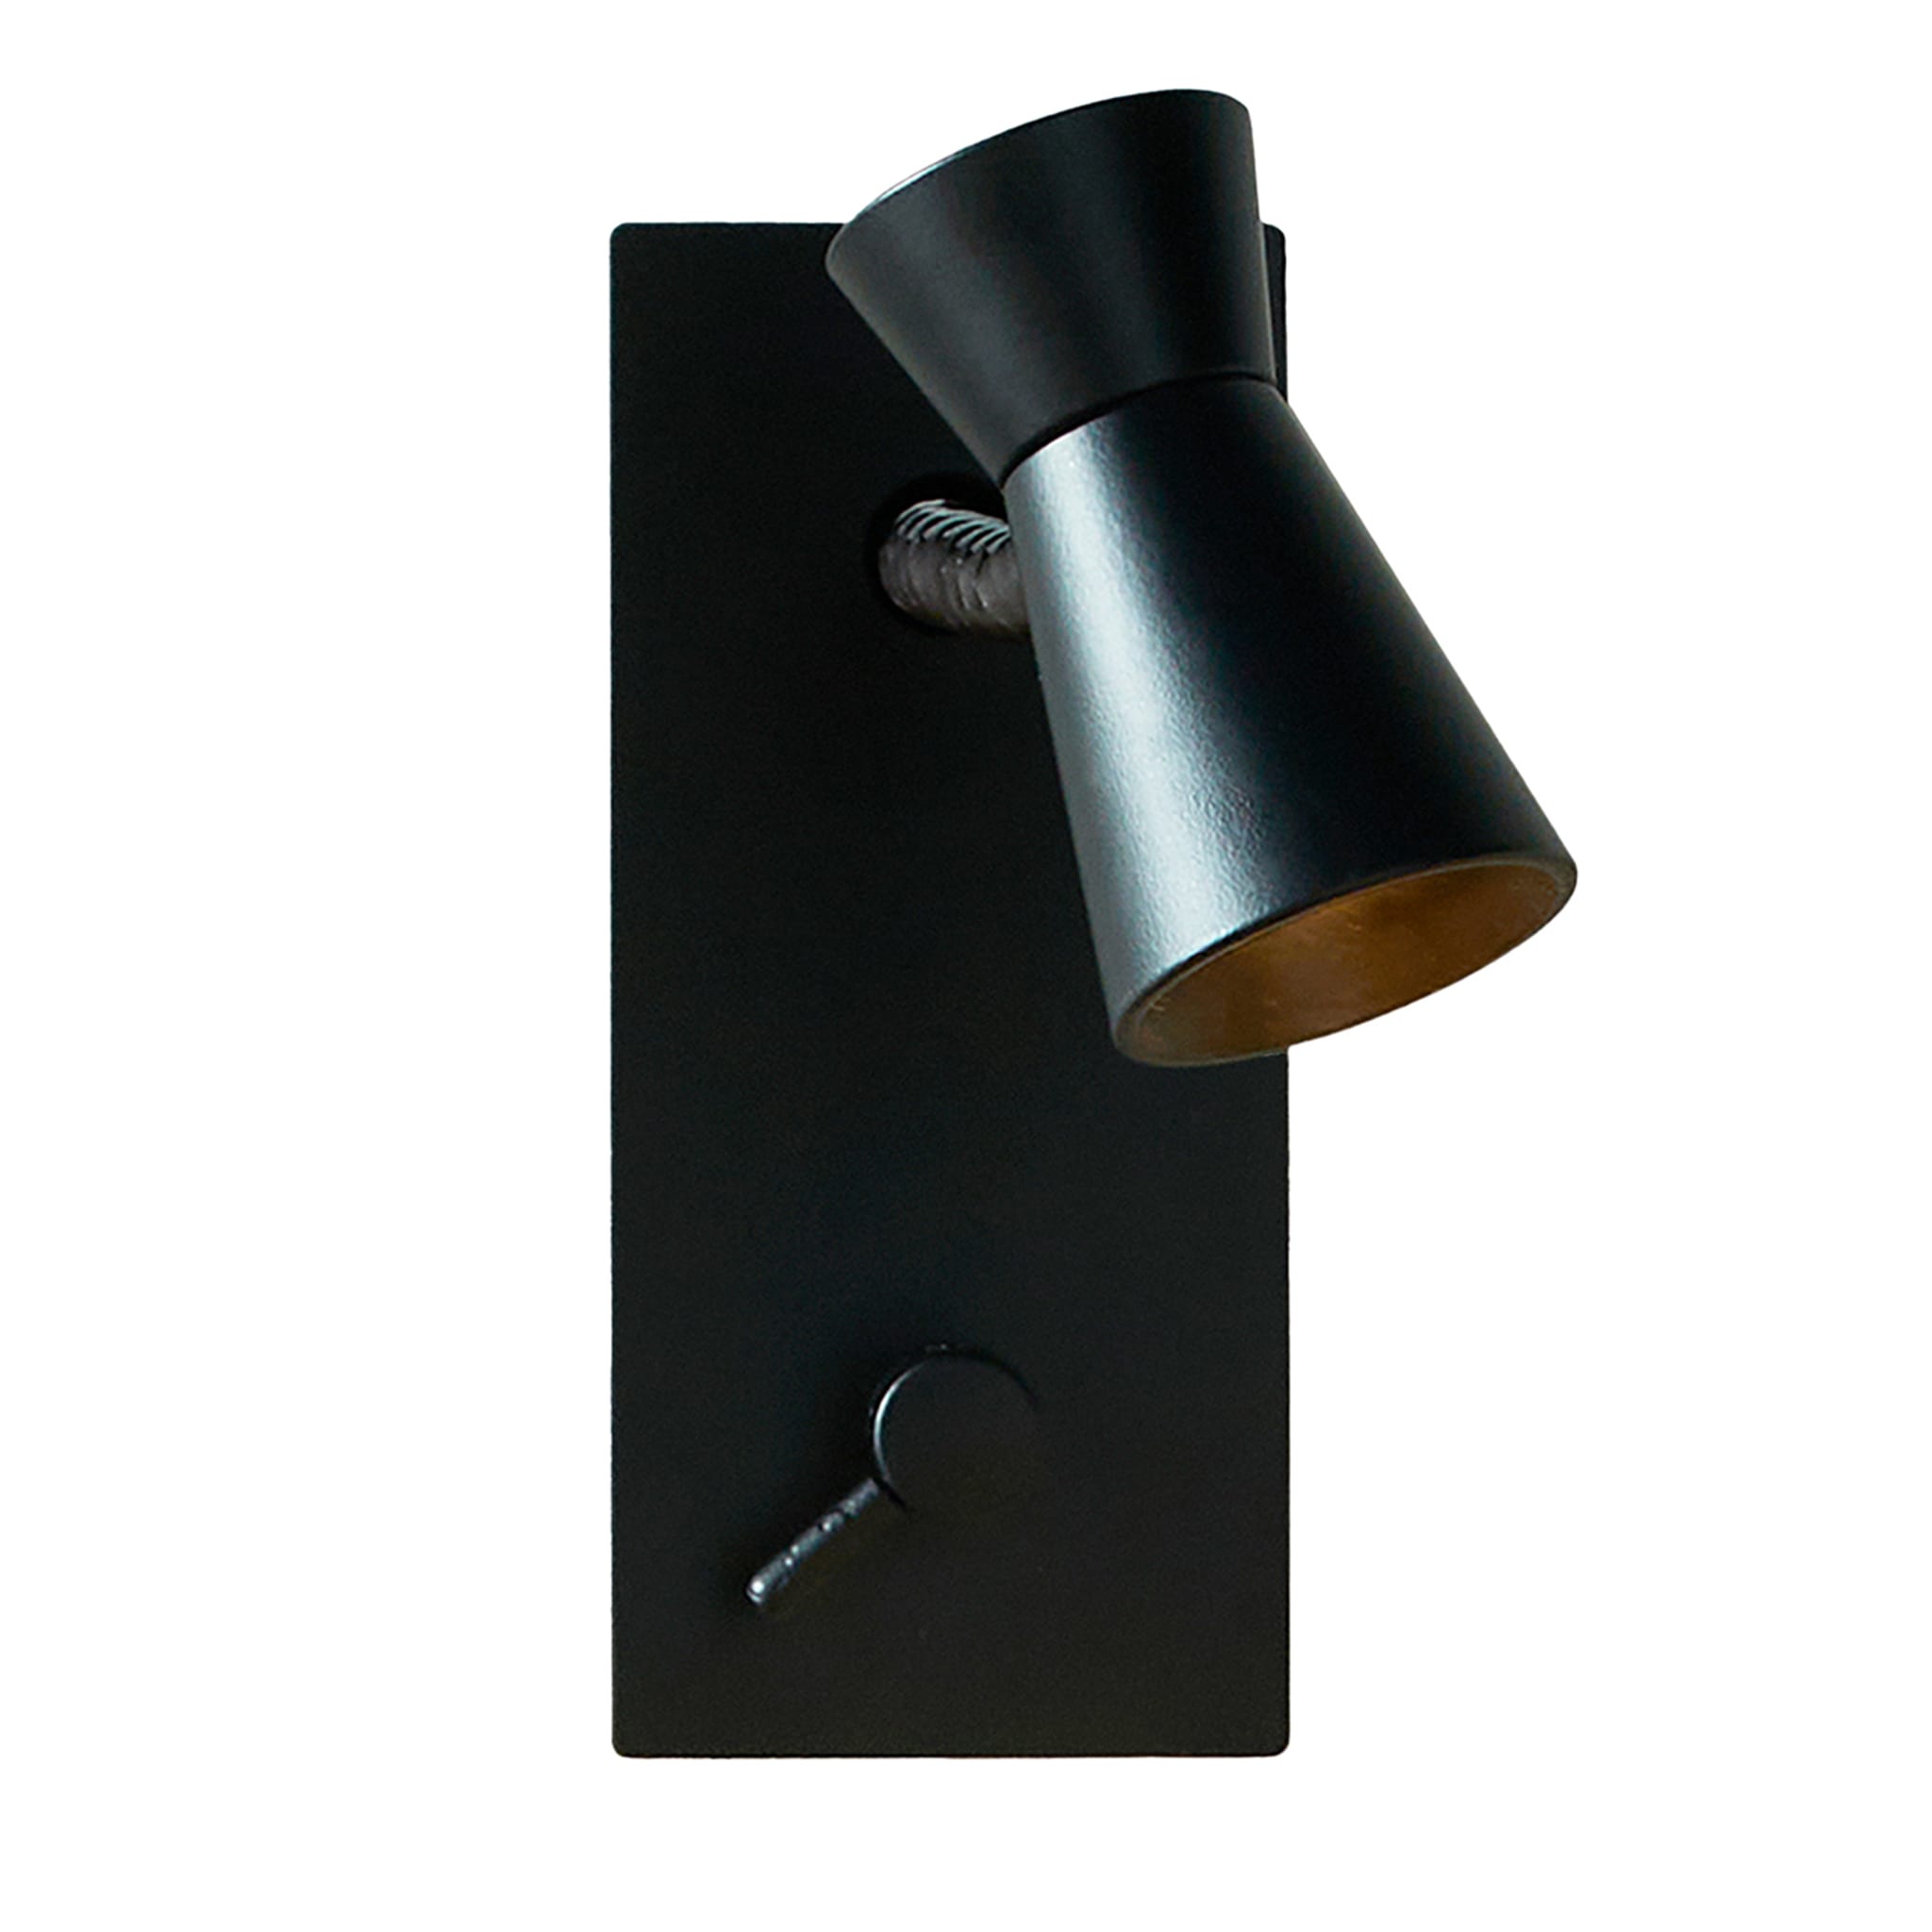 G+T Matte Black Sconce with Leather Insert - Main view